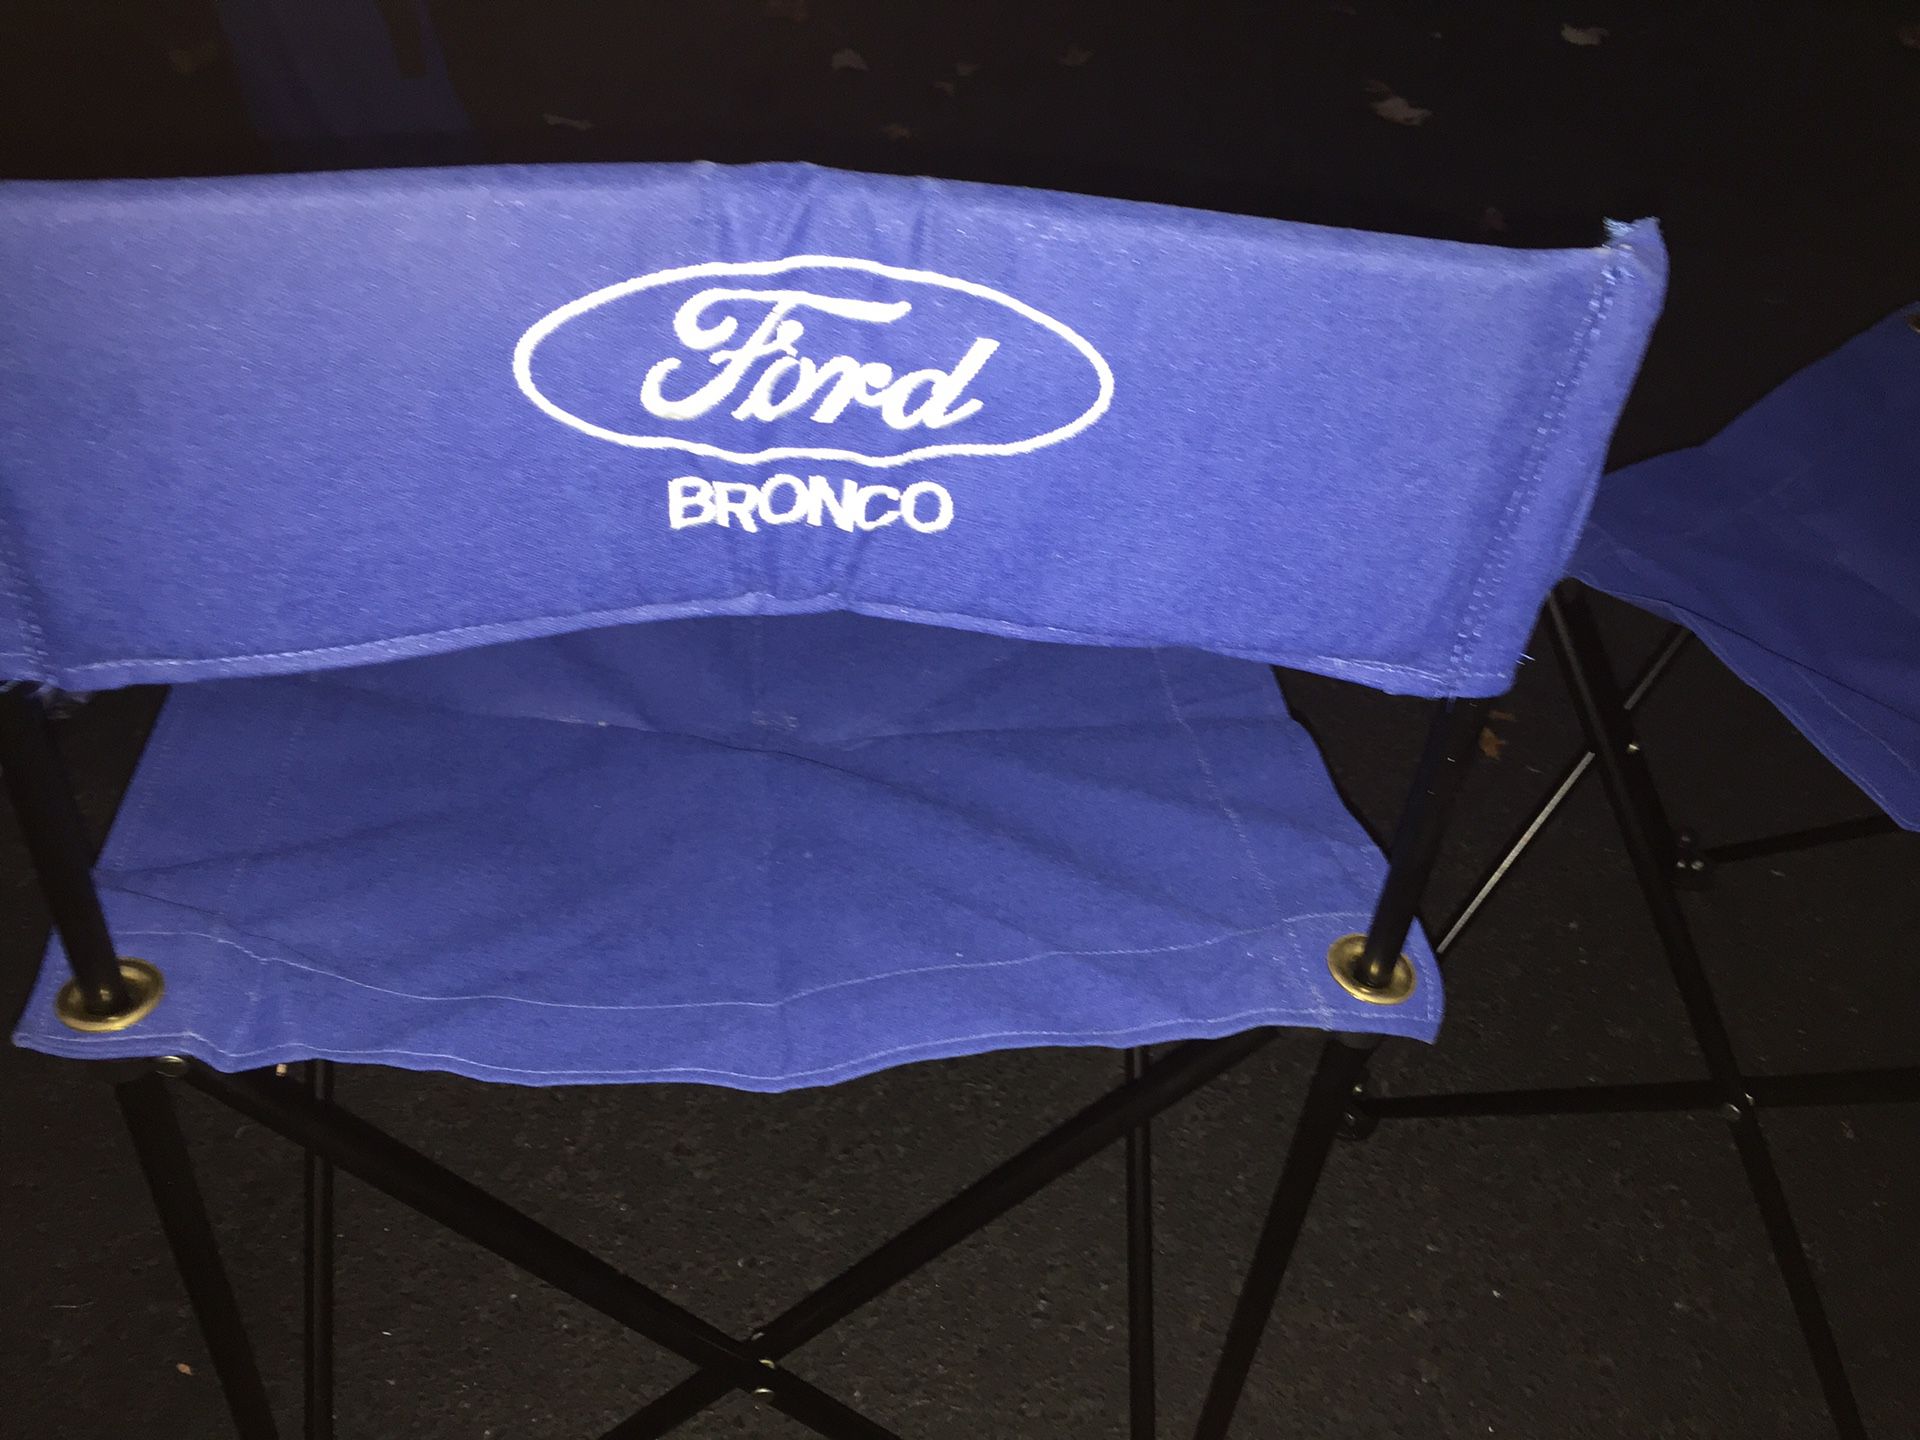 Vintage Ford Bronco Lawn Chairs Set of 2